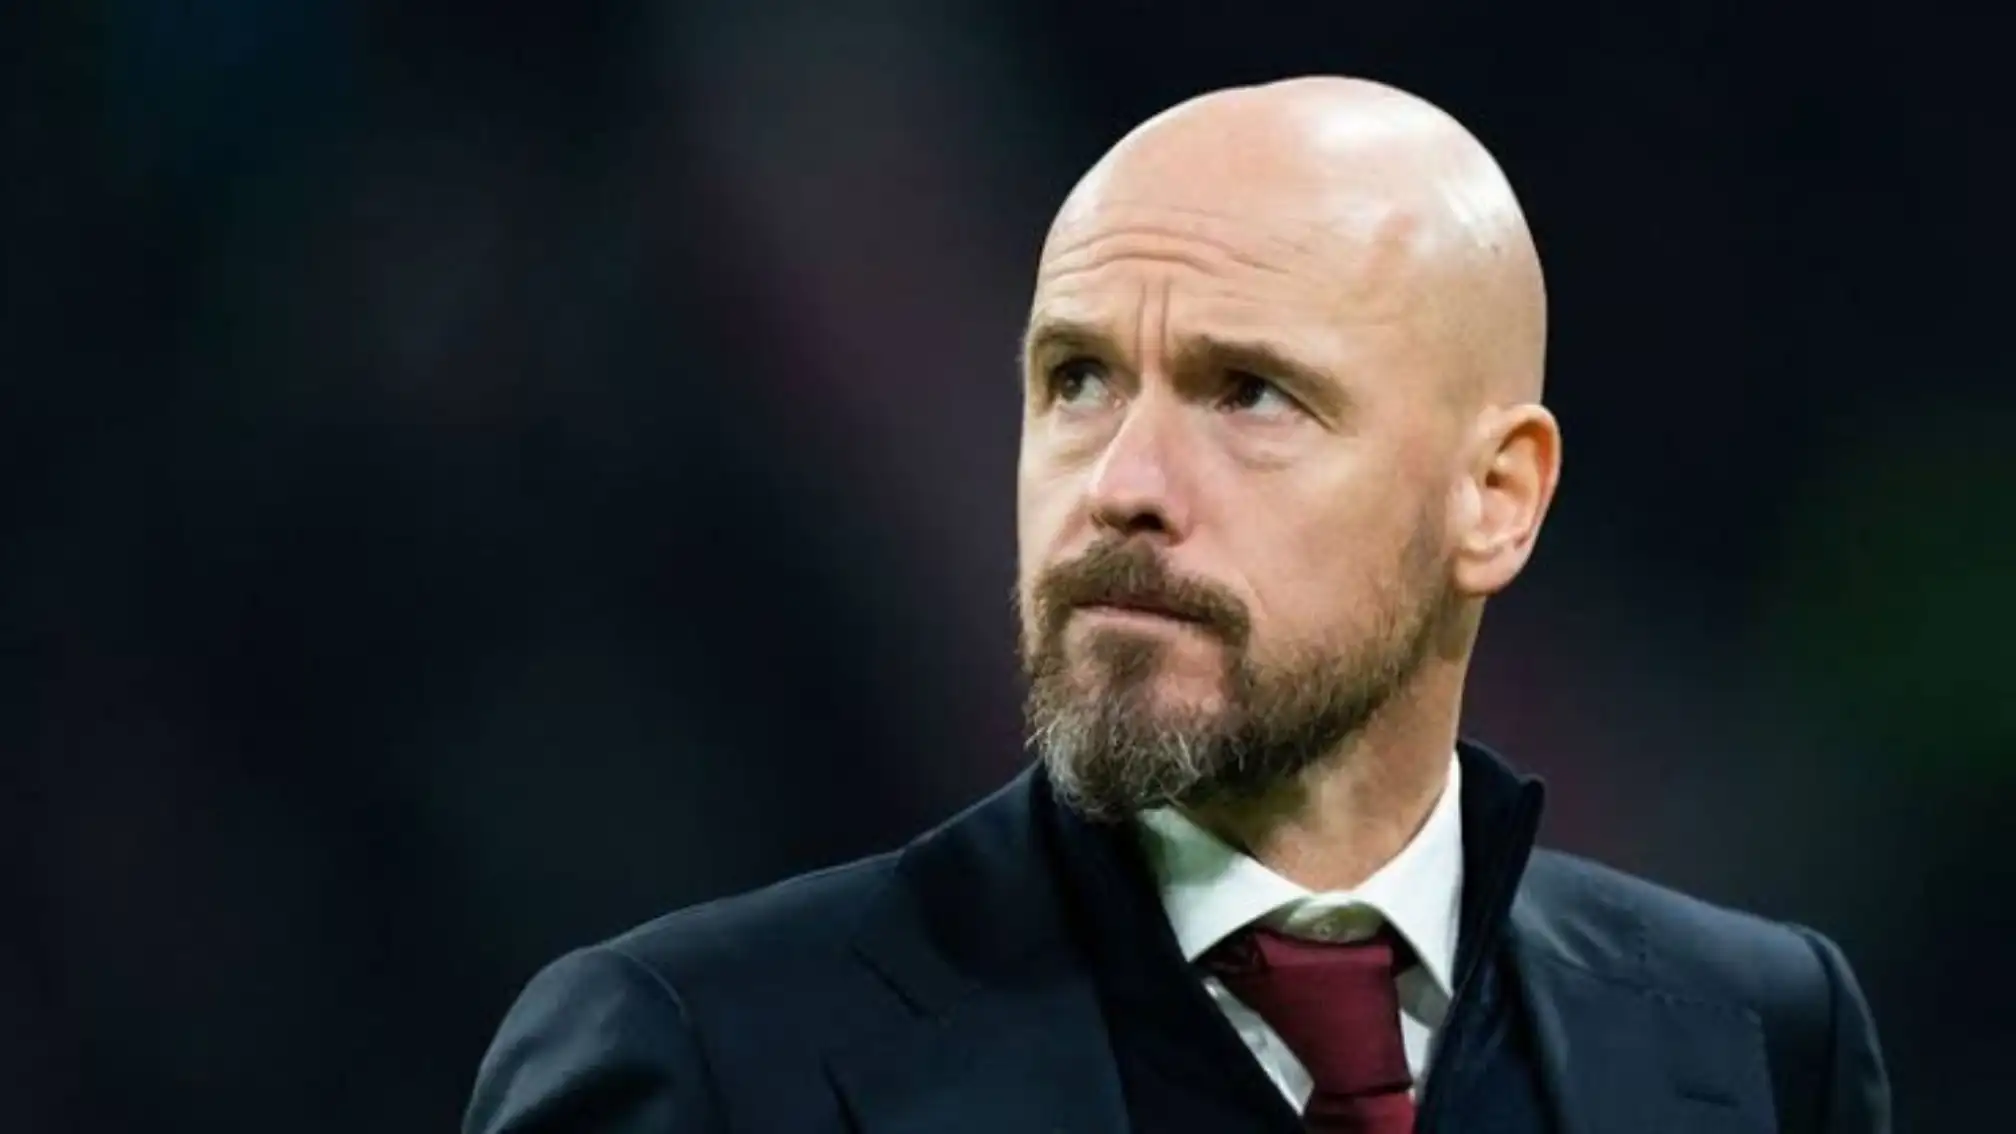 Cristiano Ronaldo asks for fans and club to give Erik ten Hag time to work